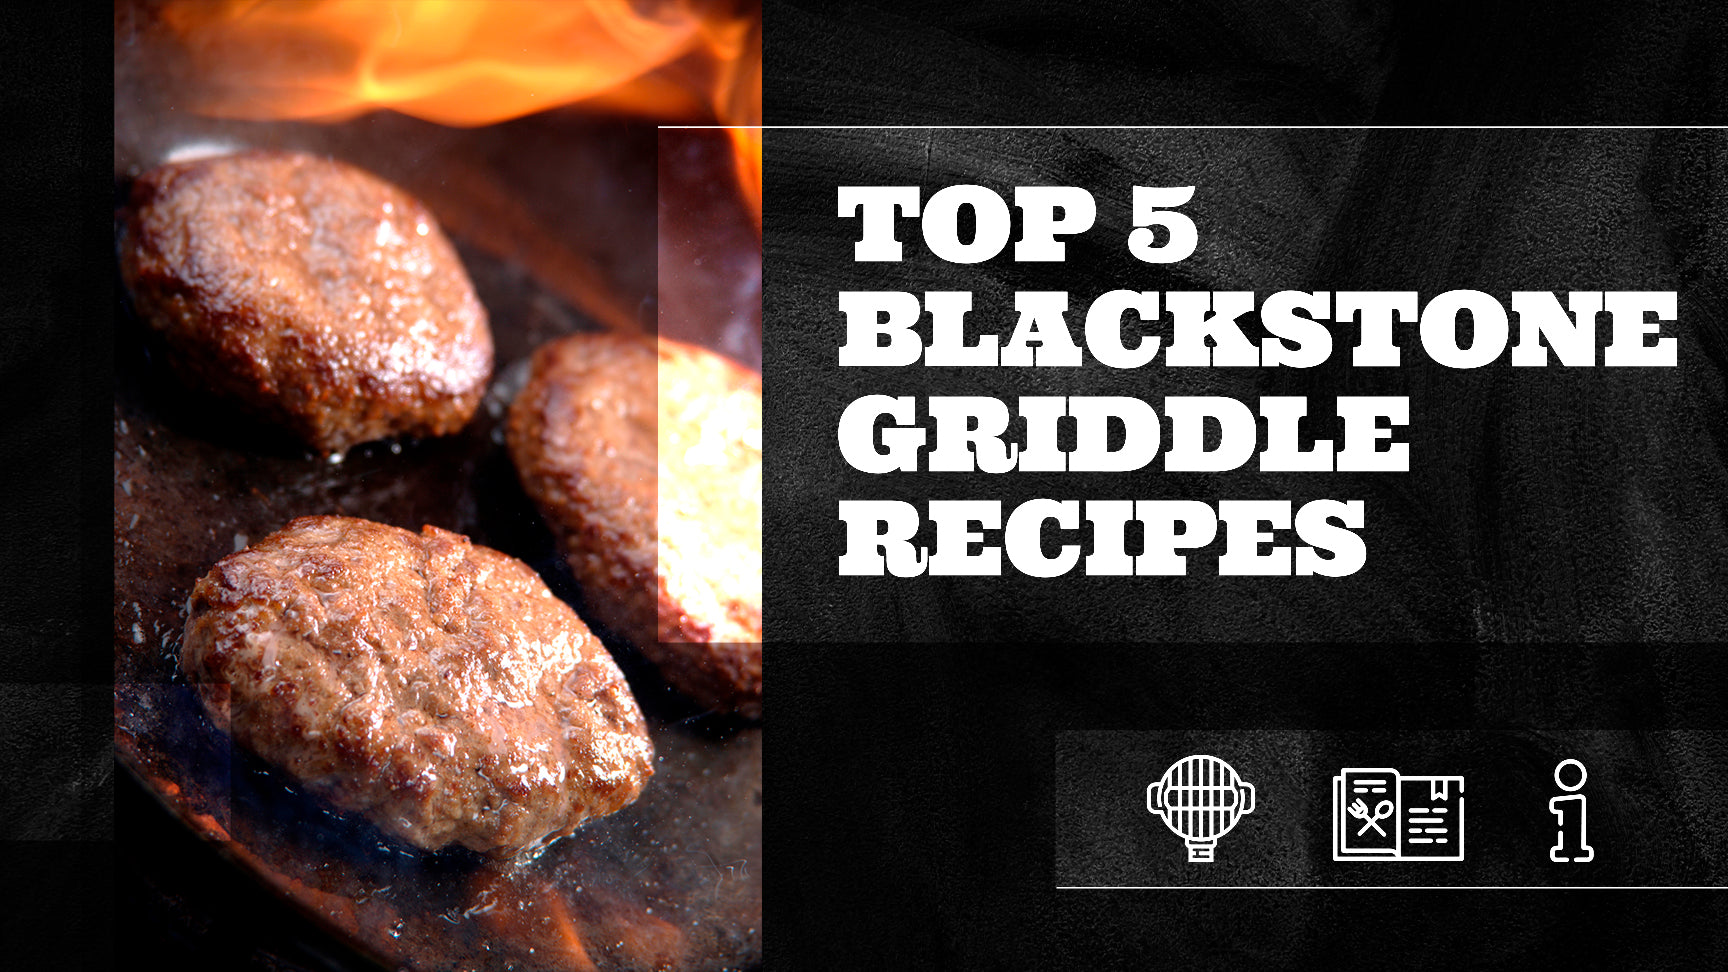 How to Season a Blackstone Griddle - Everyday Shortcuts